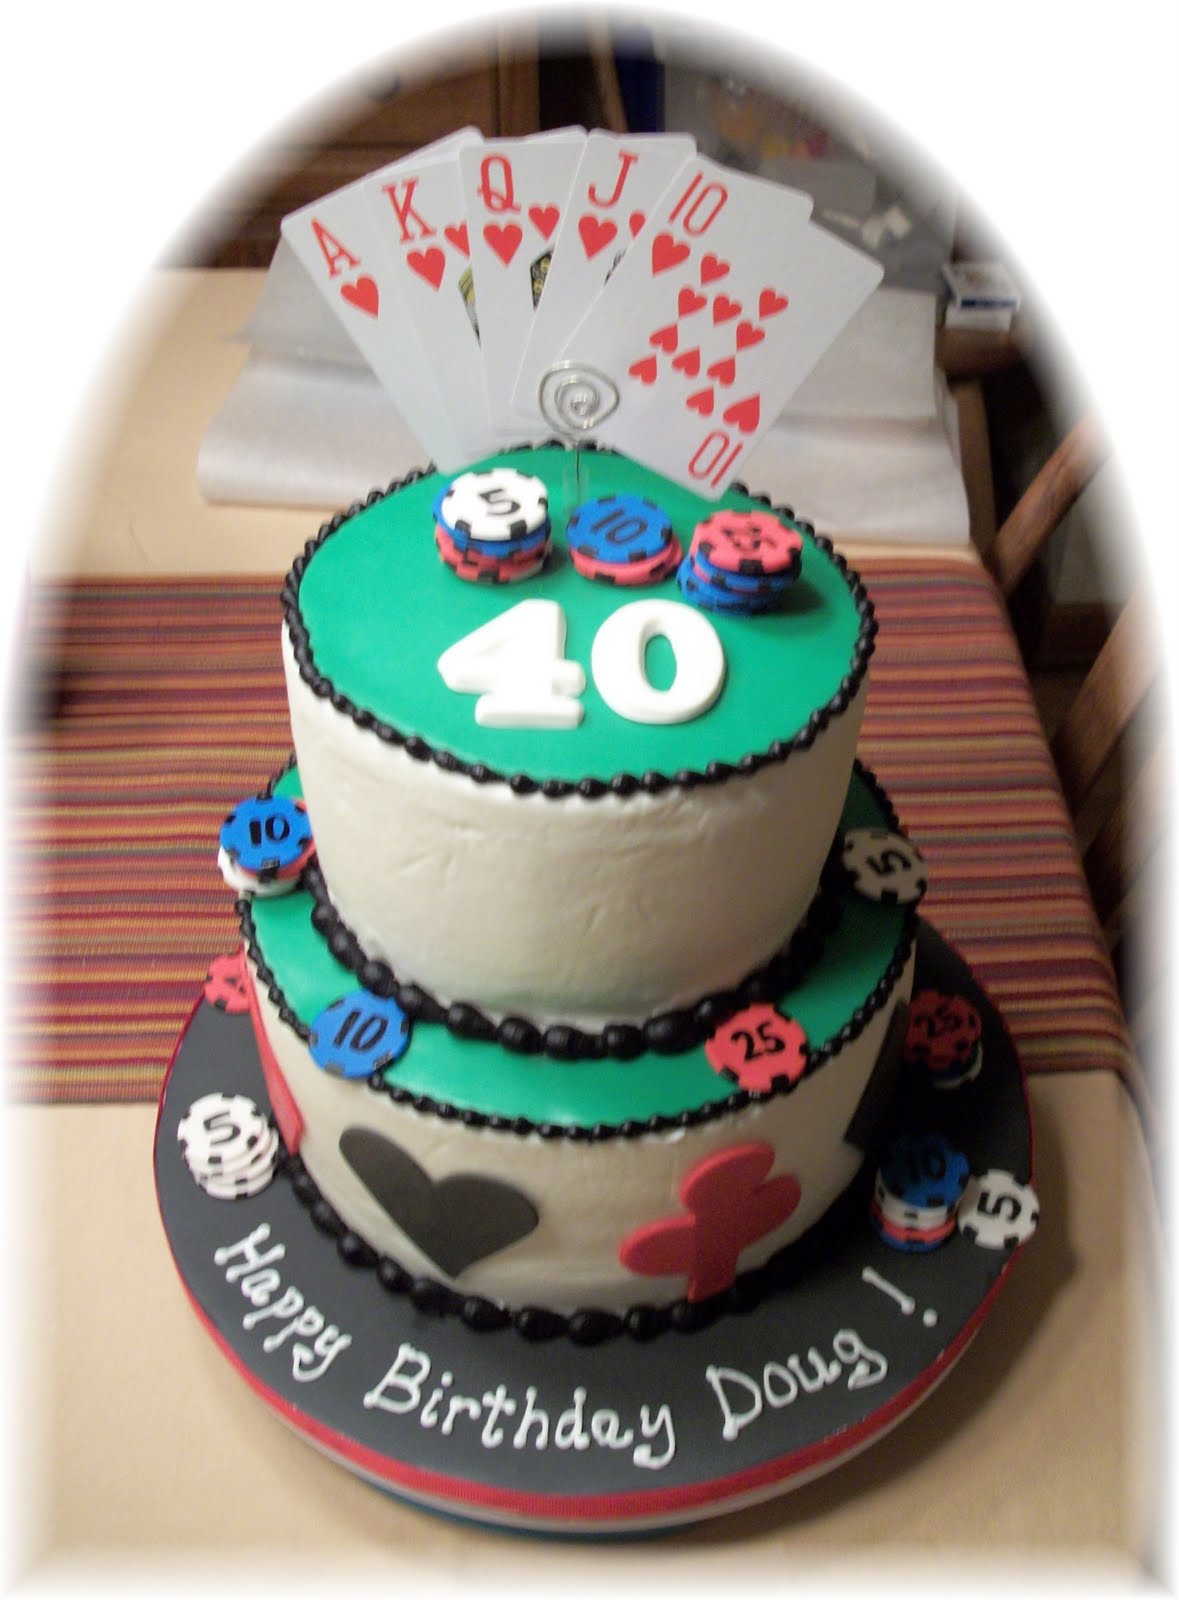 cool birthday cake for men  cards from the dollar store top this cake. Poker chips are fondant